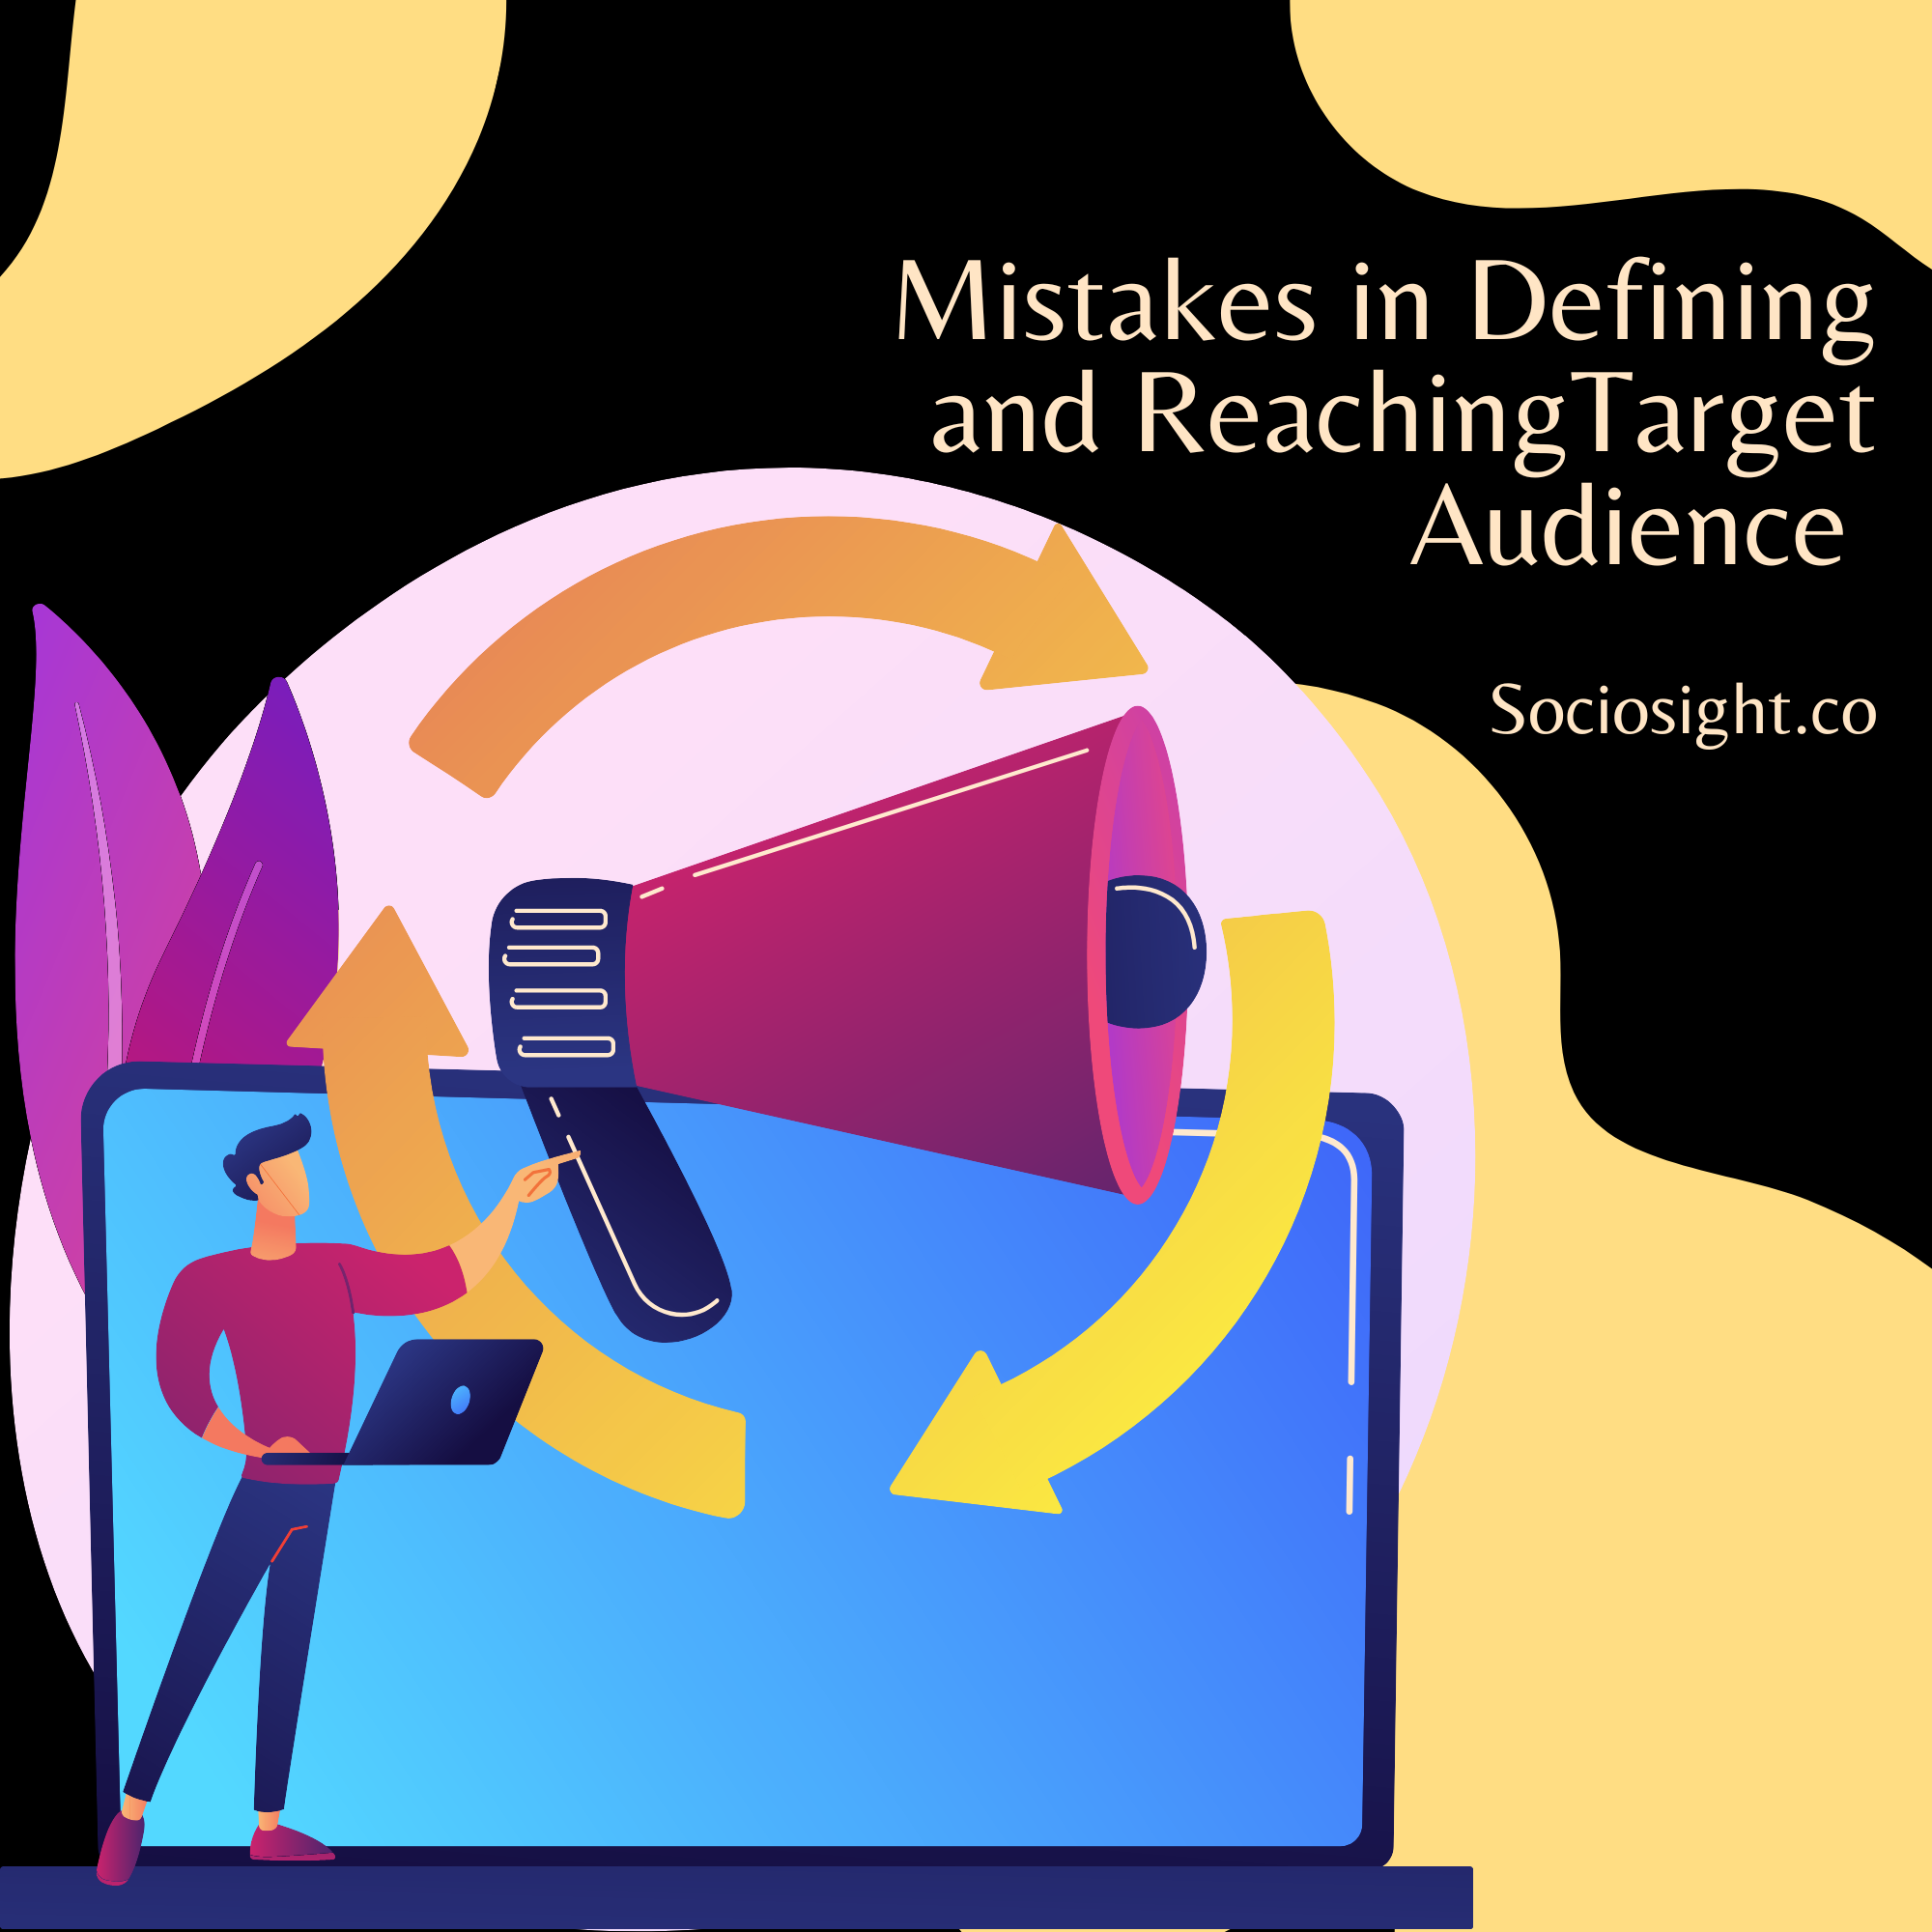 7 Defining and Refining Target Audience Mistakes - Sociosight.co - Social Media Management